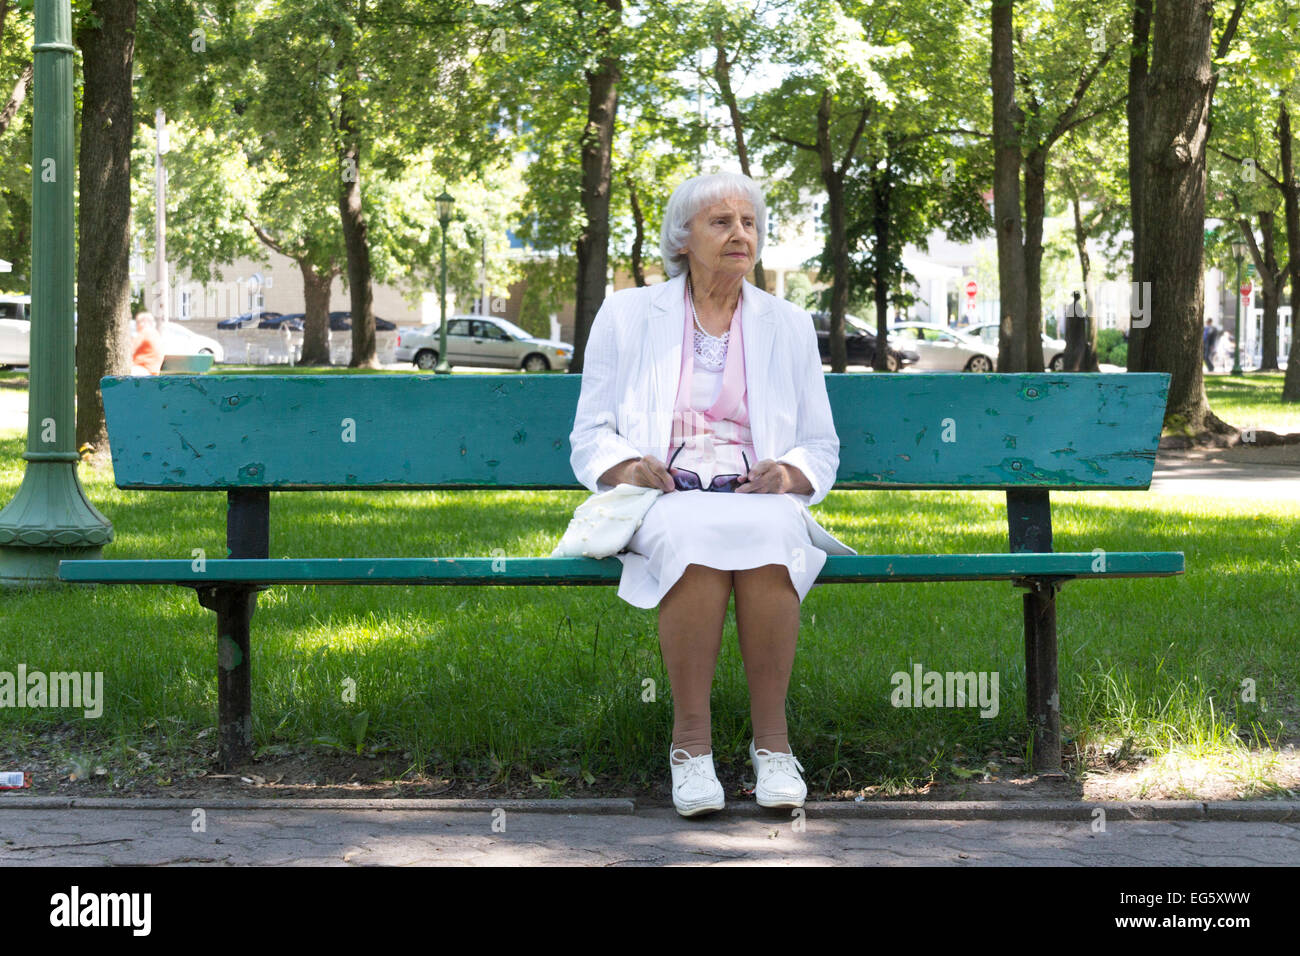 83 years old elderly woman sitting on a bench in a park Stock Photo